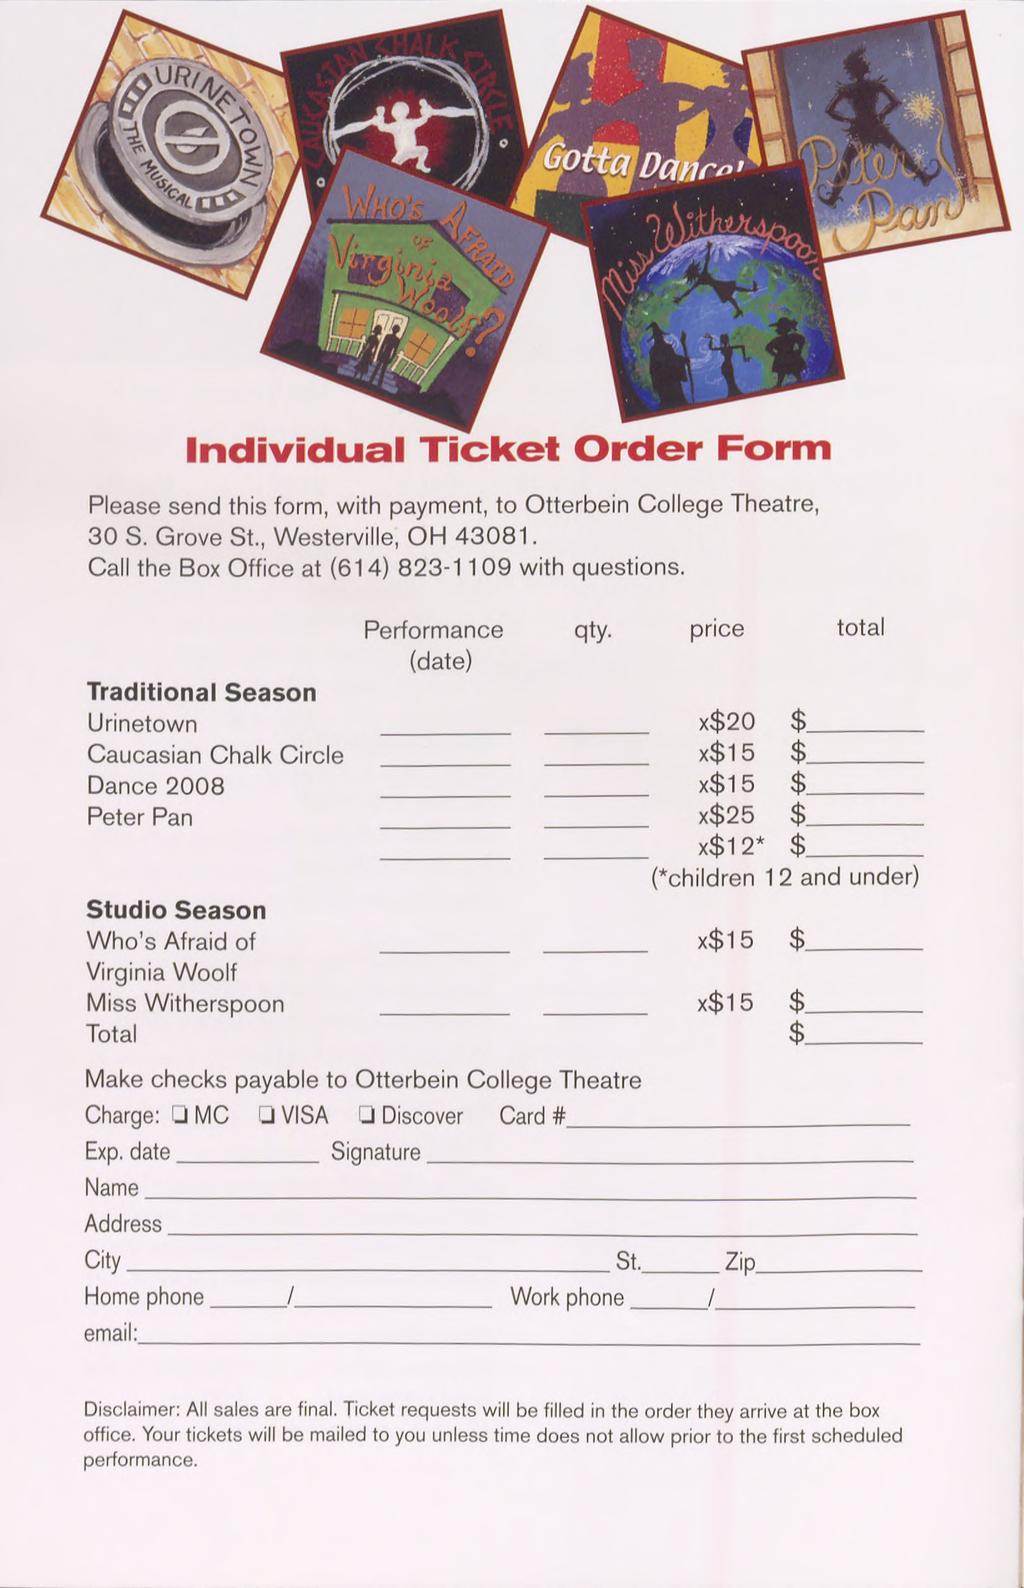 Individual Ticket Order Form Please send this form, with payment, to Otterbein College Theatre, 30 S. Grove St., Westerville, OH 43081. Call the Box Office at (614) 823-1109 with questions.